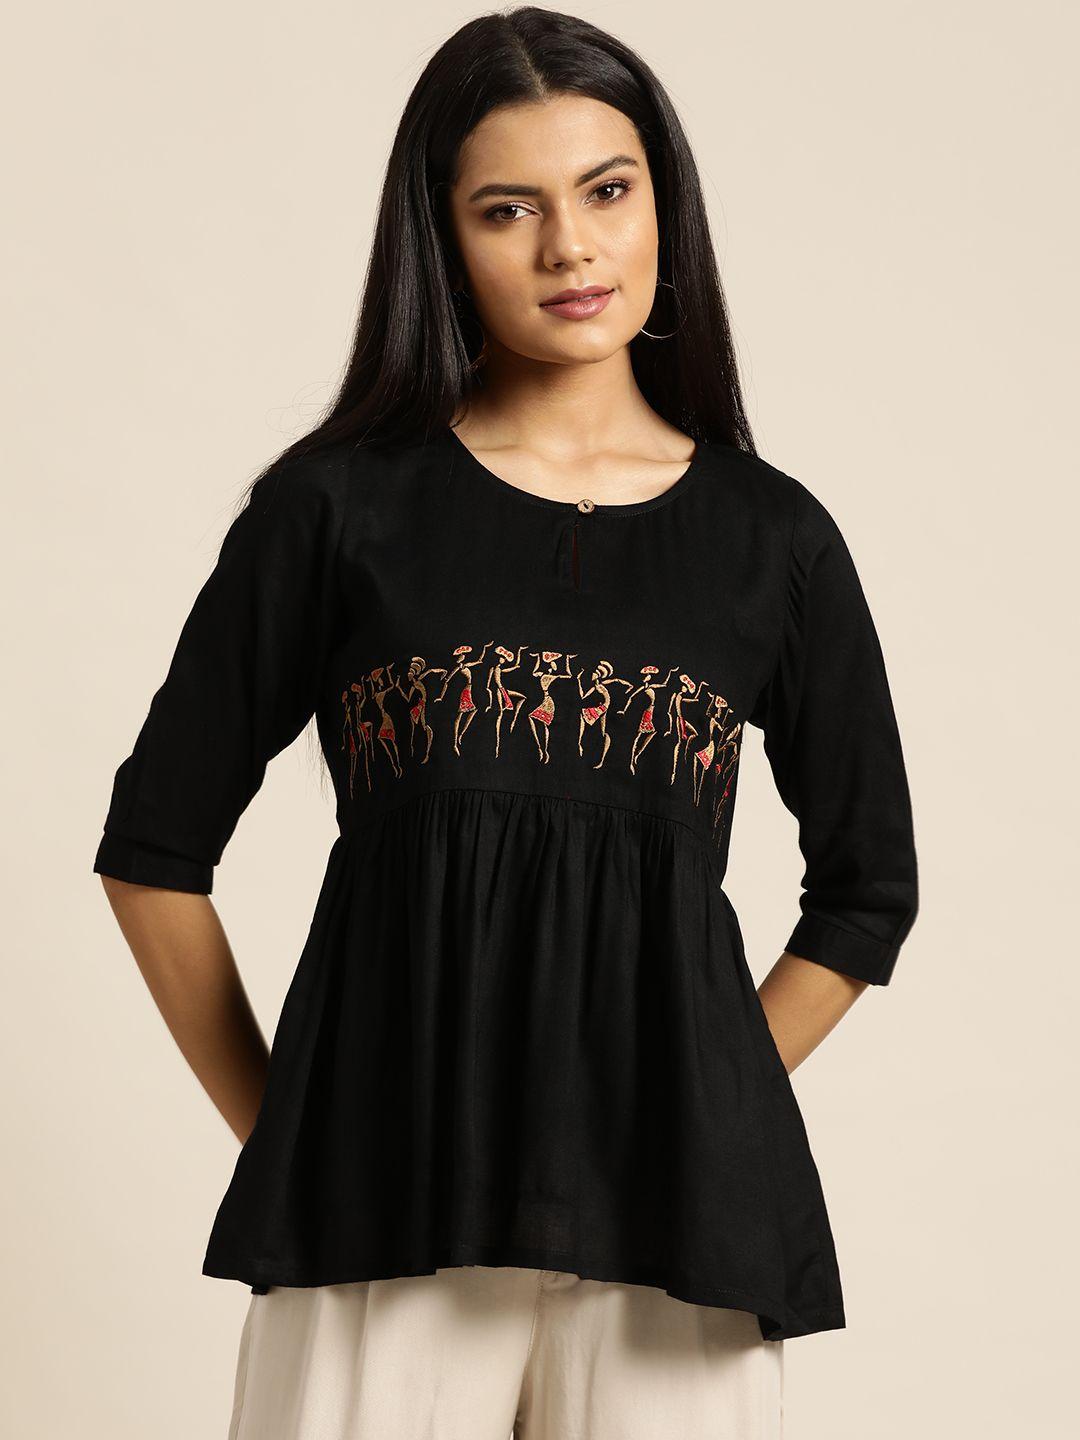 shae by sassafras black & red embroidered liva a-line top